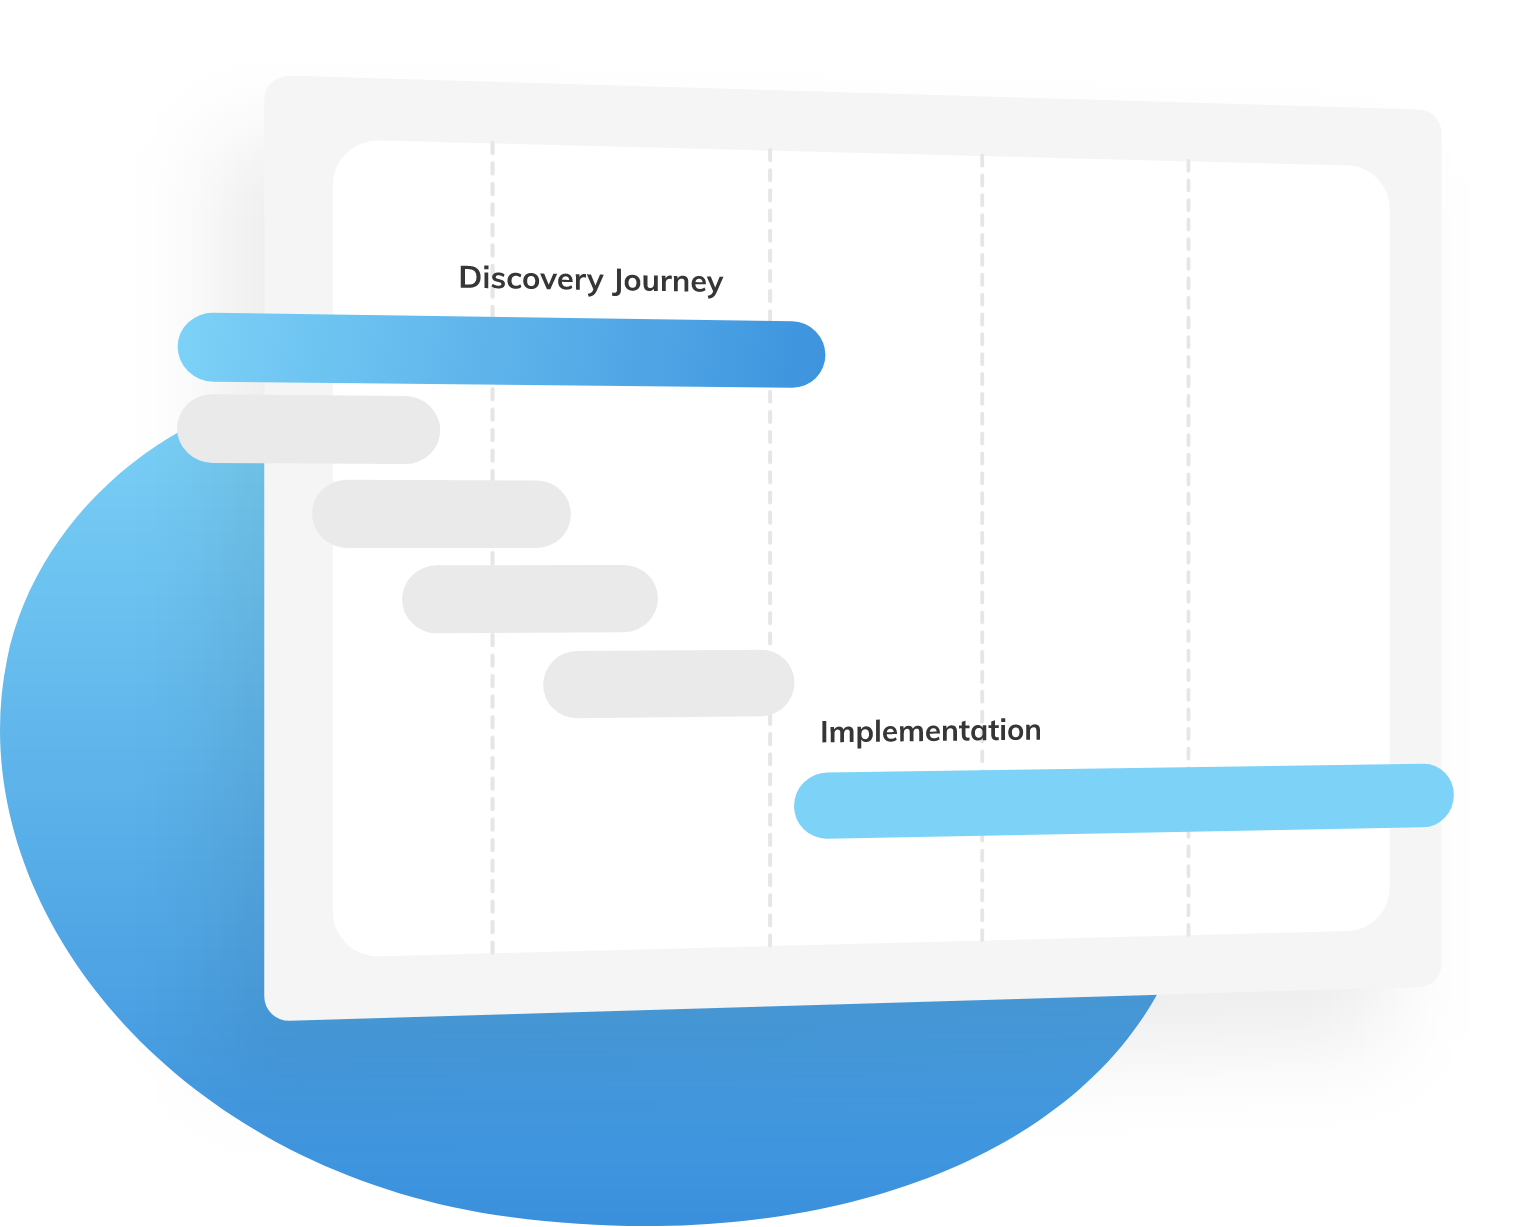 Discovery Journey to Implementation graphic